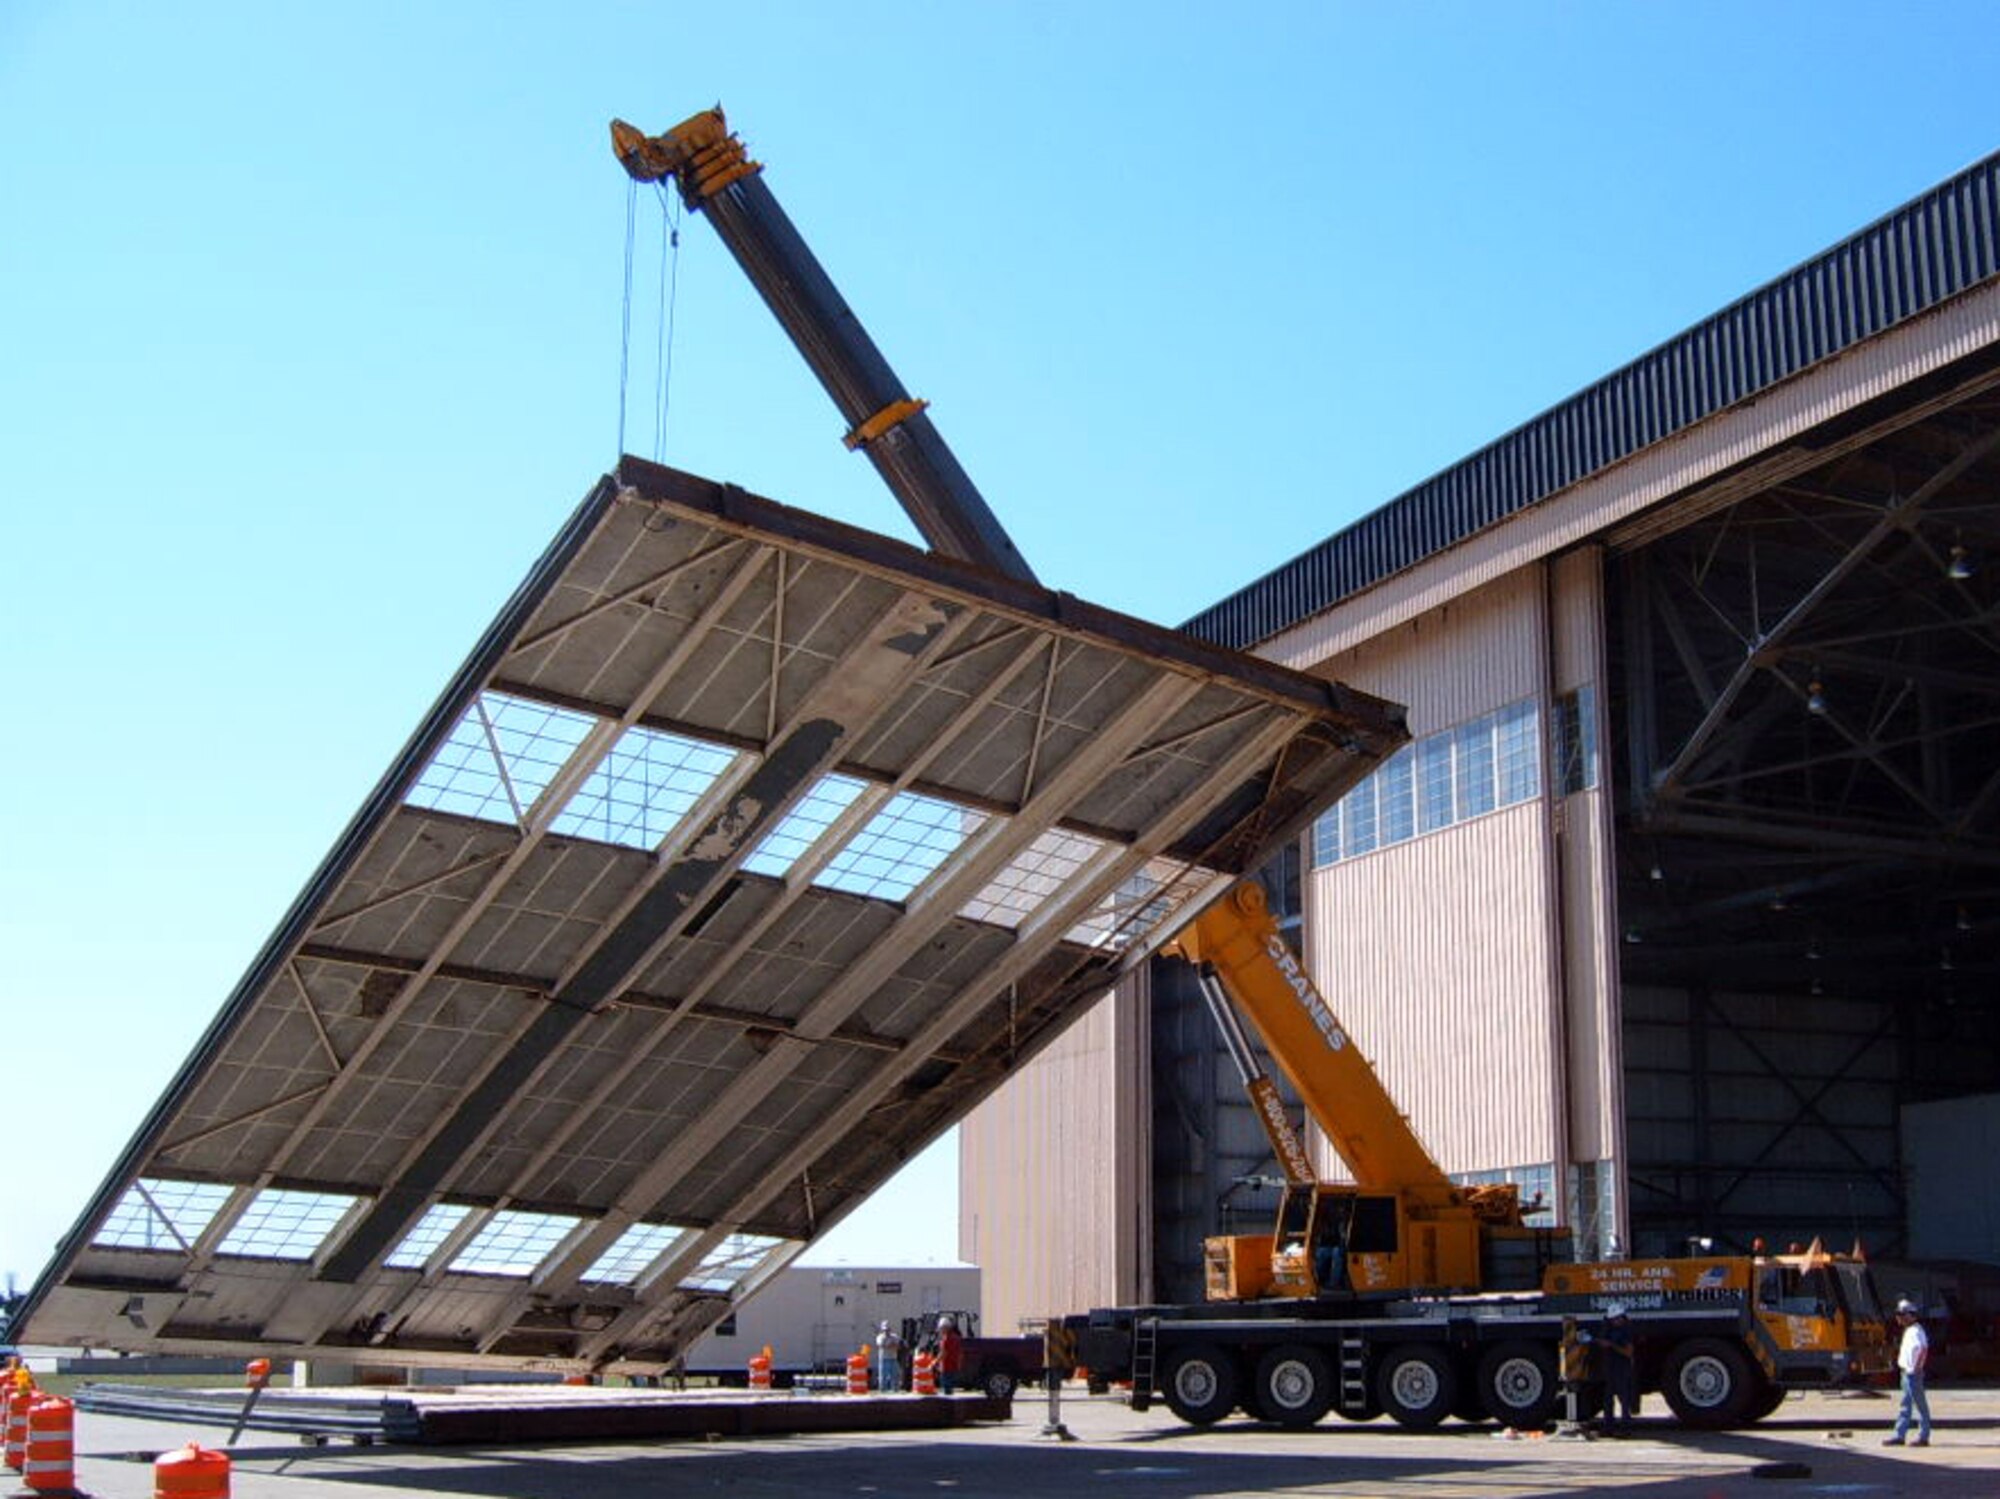 A crane lowers one of the original Eason Hangar doors to the ground as part of phase 1 repairs.  The hangar was built in 1957 and was heavily damaged from recent hurricanes.  All 16 doors will be replaced by the end of the year along with other modifications.